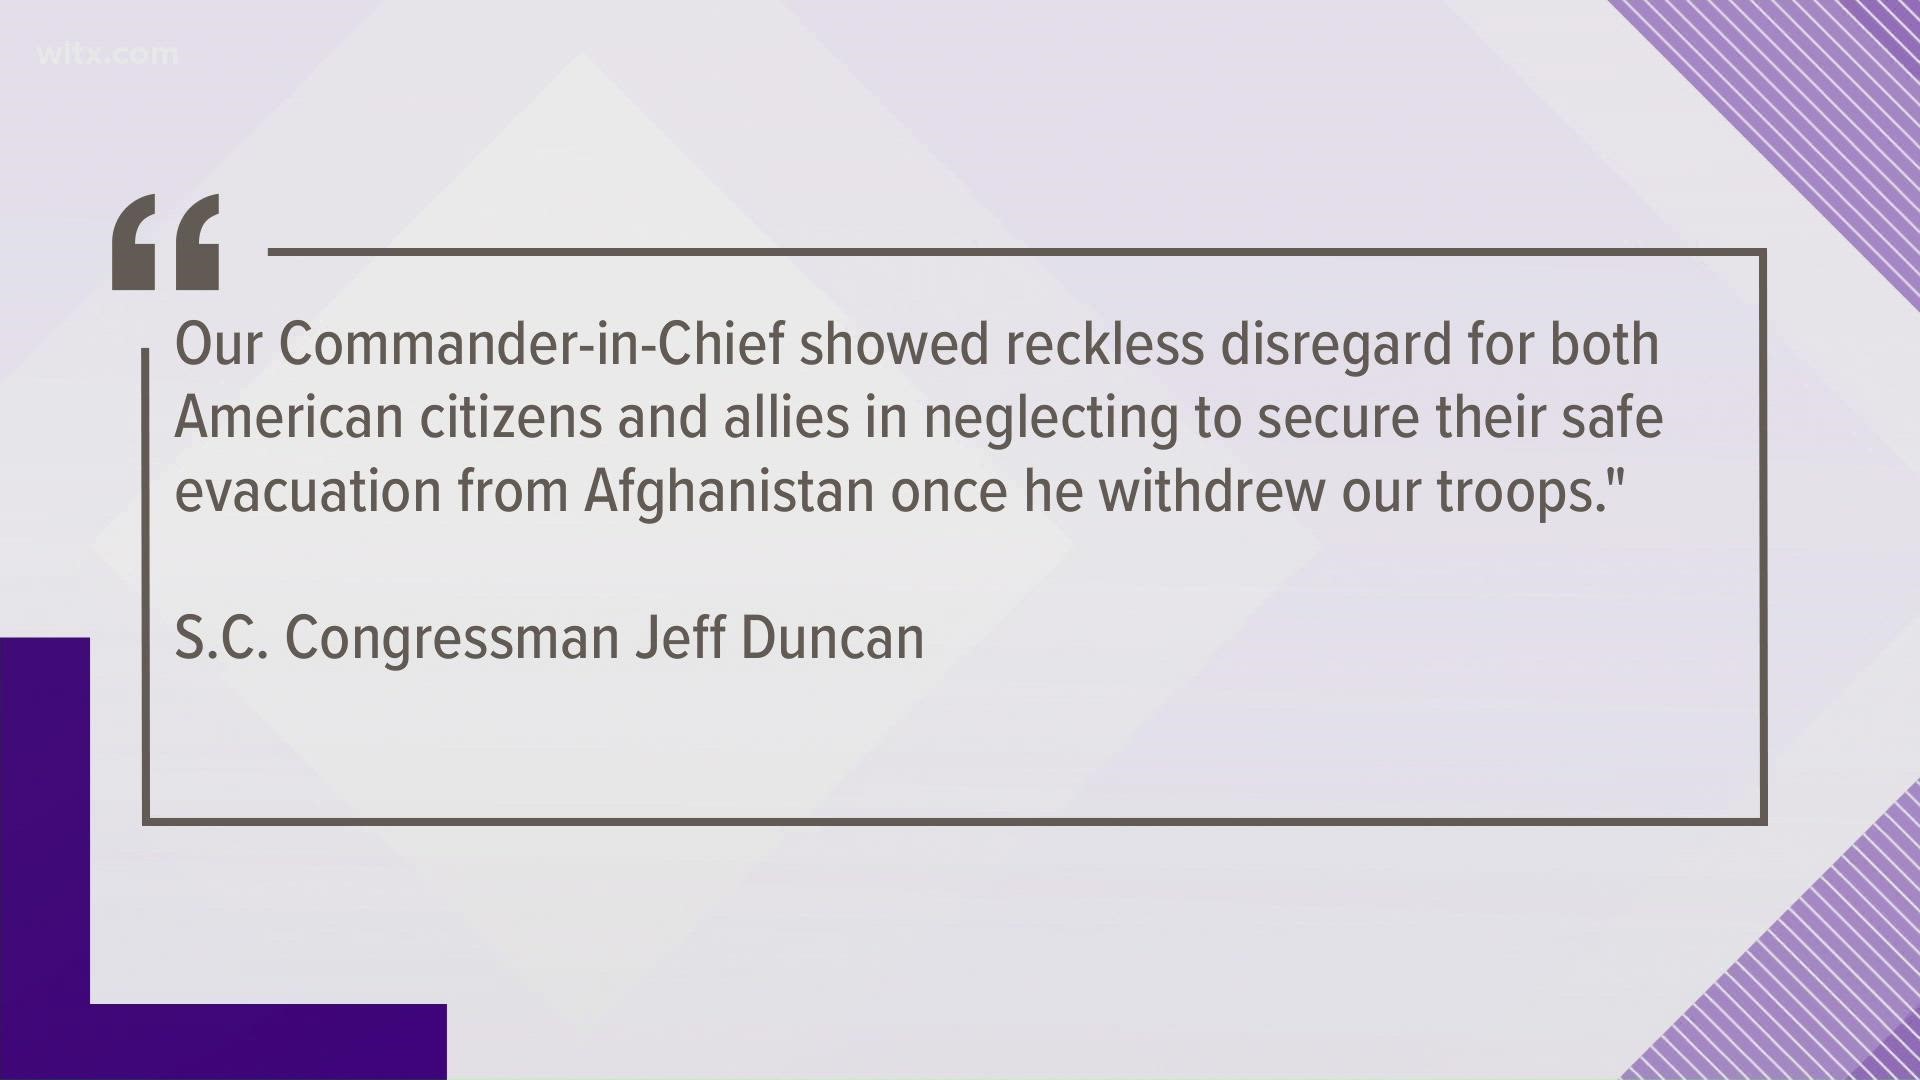 Duncan's call came just hours after an attack at an airport in Kabul, Afghanistan that killed 13 U.S. servicemembers.